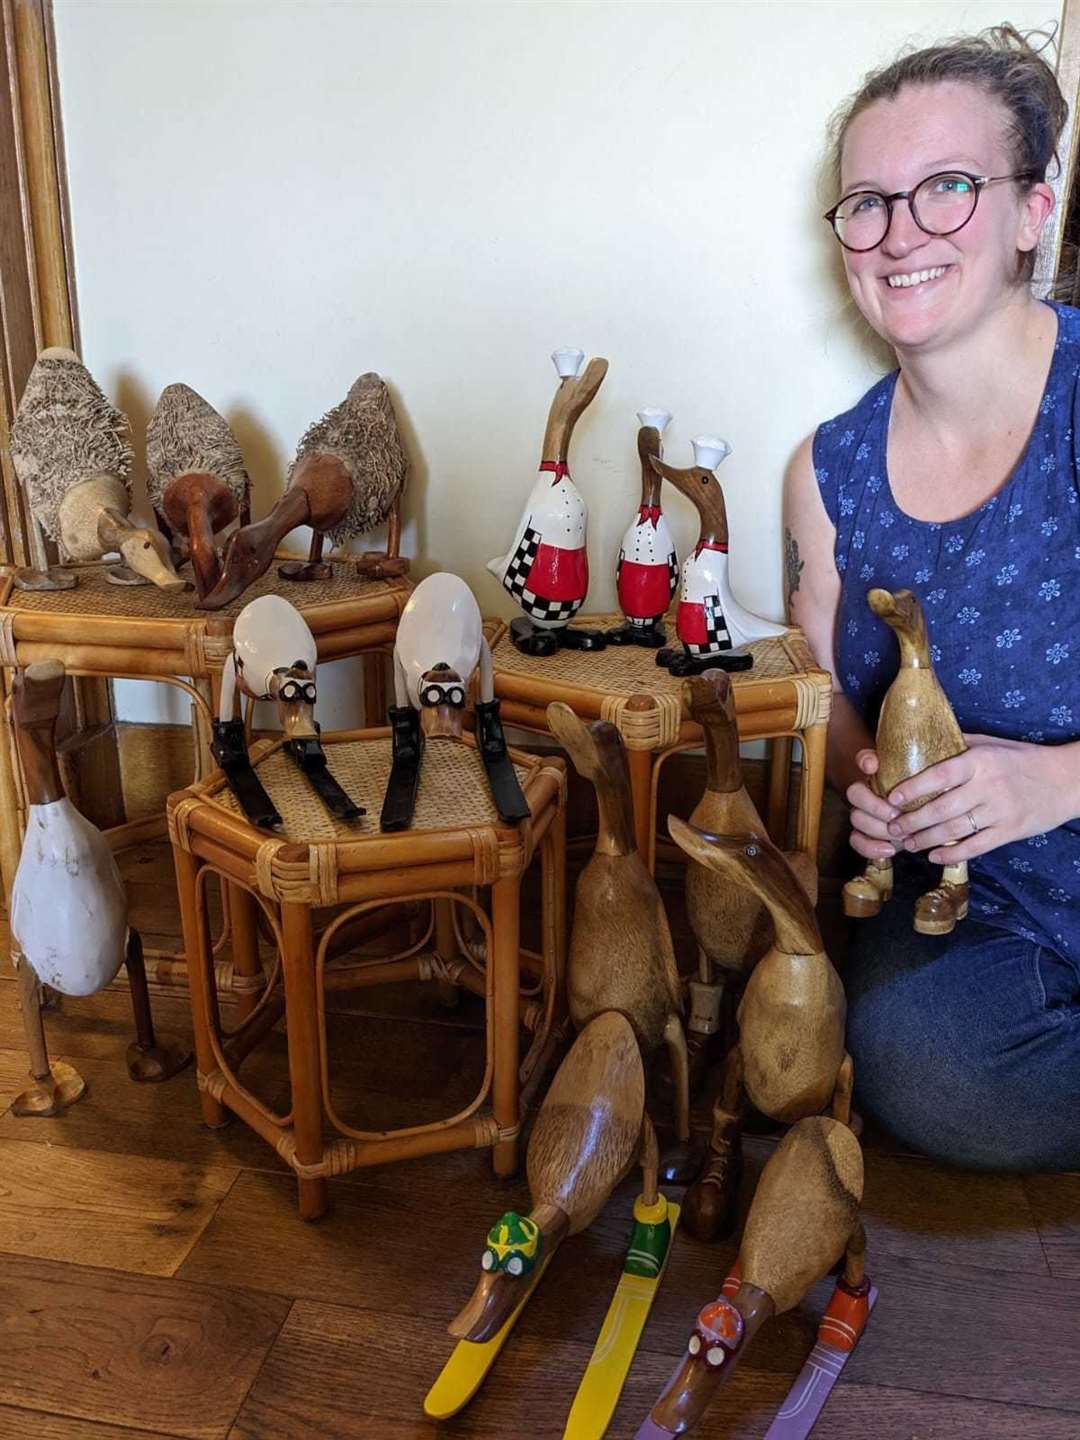 Charis Gibbins, helping unpack and price a selection of ornamental ducks hand carved from bamboo roots in Java Indonesia.